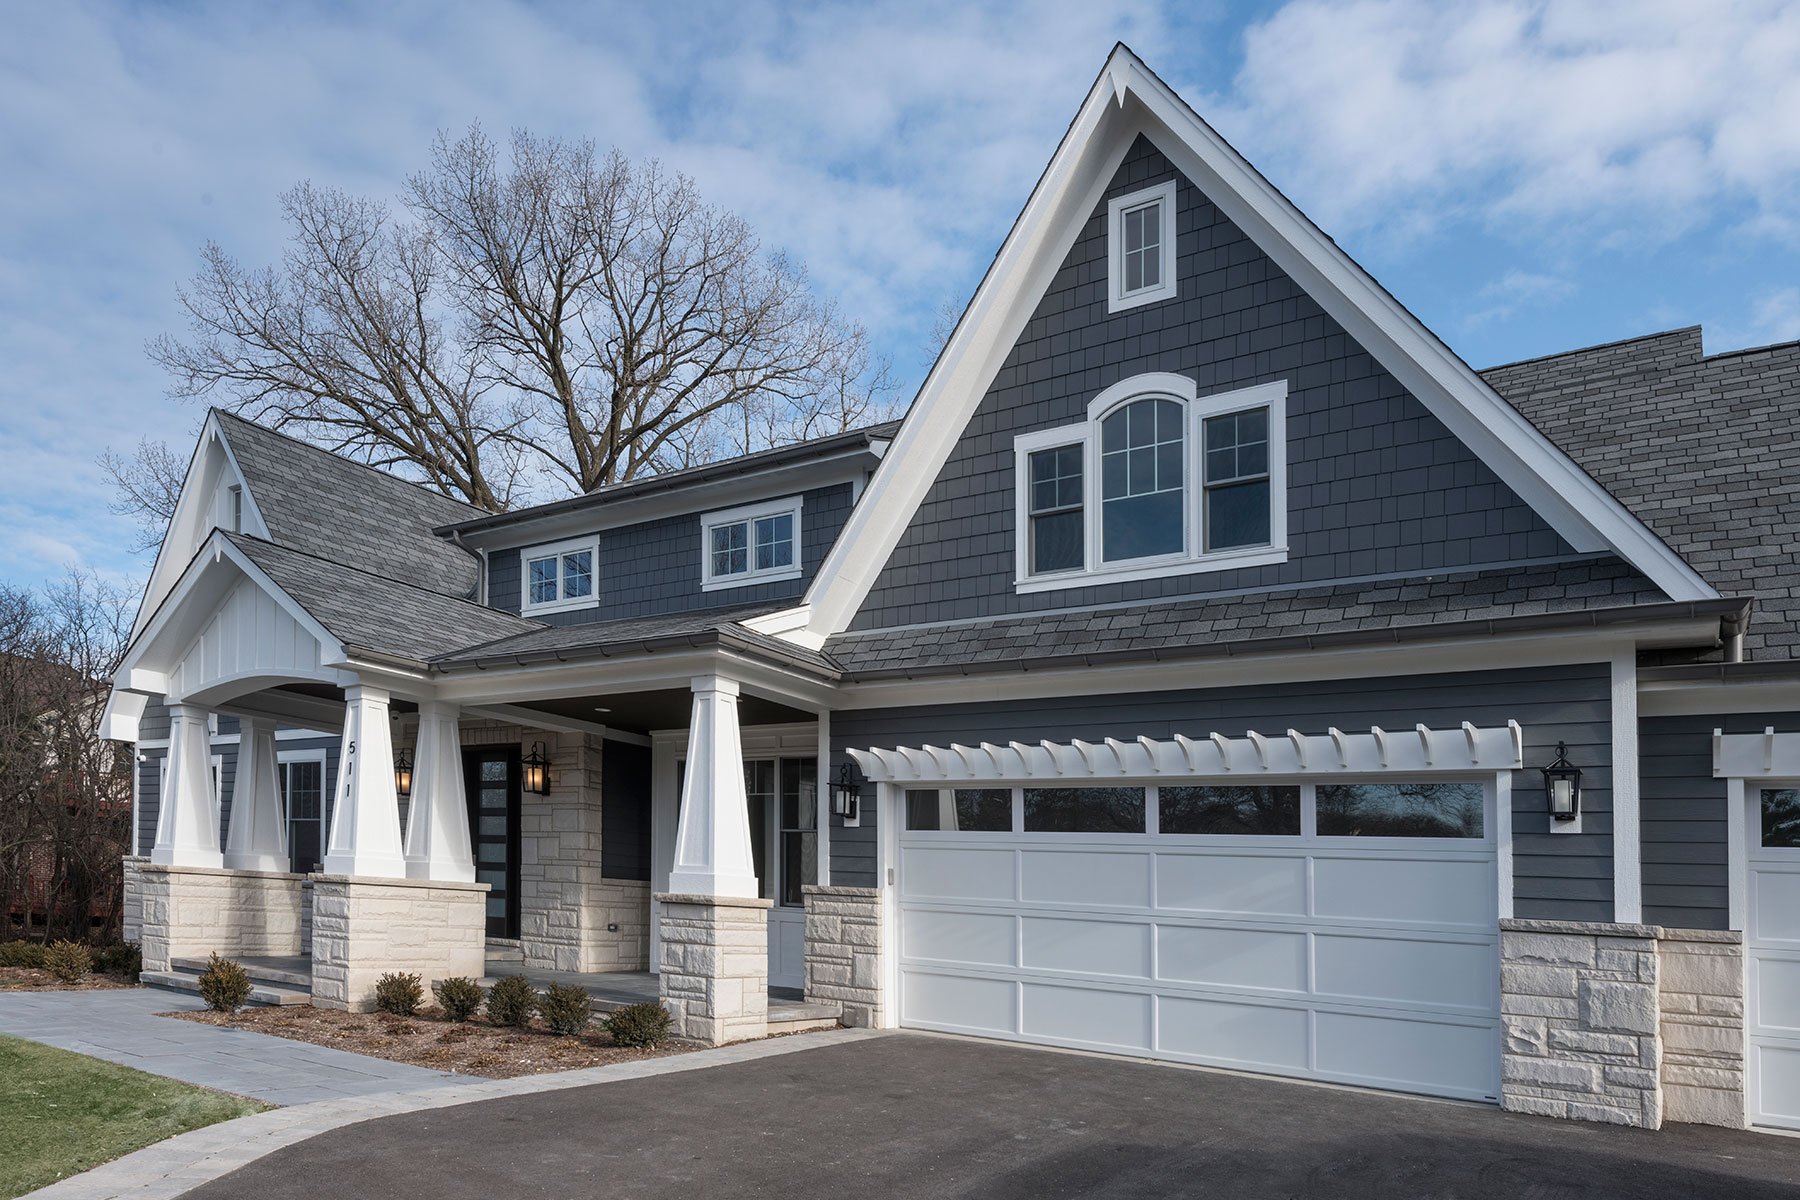 Garage Door - 511 N Branch Rd., Glenview, IL Custom Home. America's Custom Home Builders: New Construction, Remodeling, Restoration Services. Residential and Commercial.